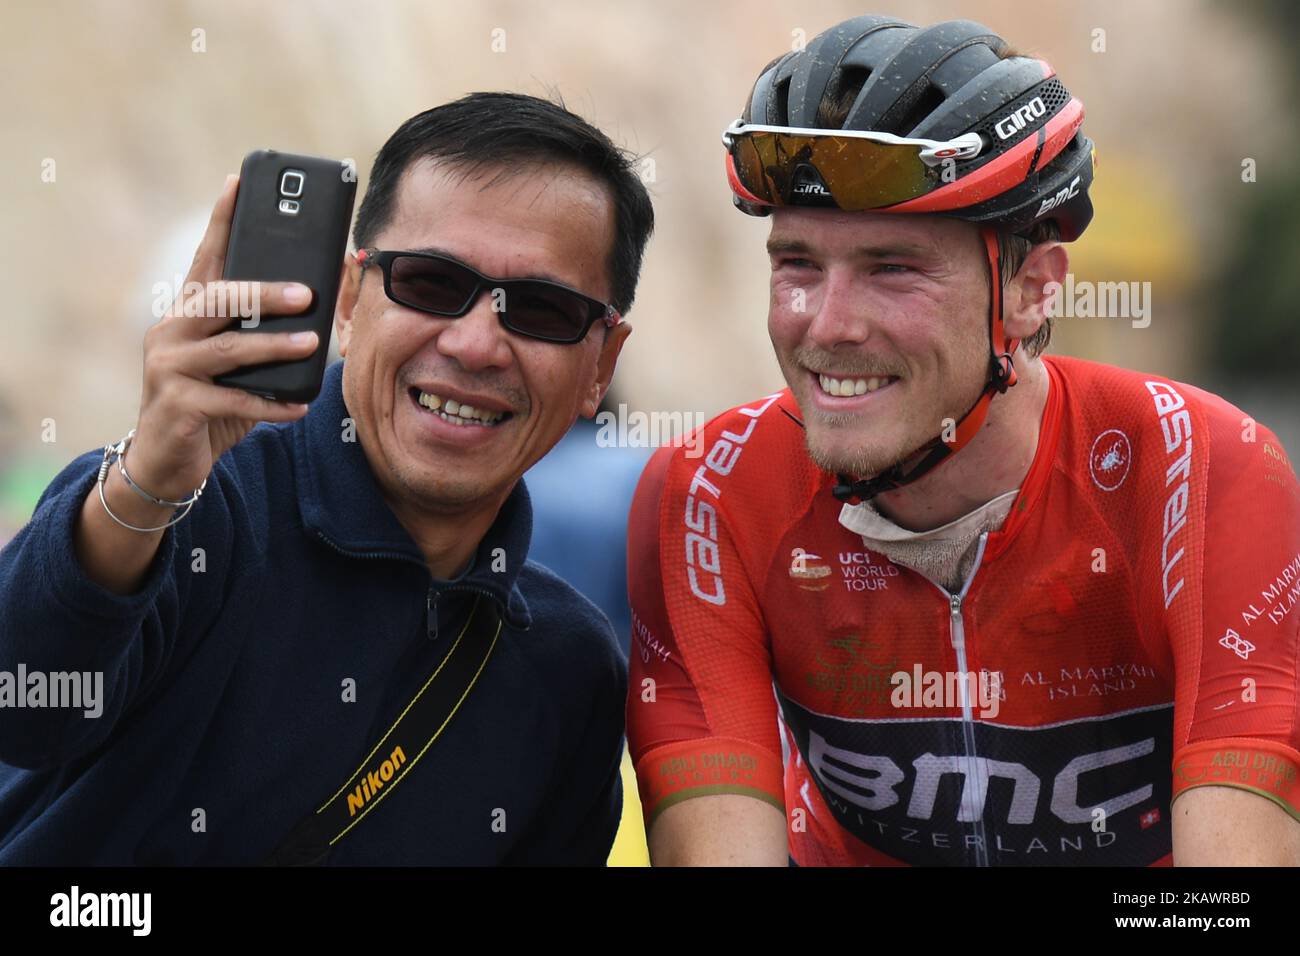 Australia's Rohan Dennis from BMC Racing Team posses for a selfie with a fan at the finish line of the fifth and final stage of the 2018 Abu Dhabi Tour. On Sunday, February 25, 2018, in Qasr Al Muwaiji, Abu Dhabi, United Arab Emirates. (Photo by Artur Widak/NurPhoto)  Stock Photo